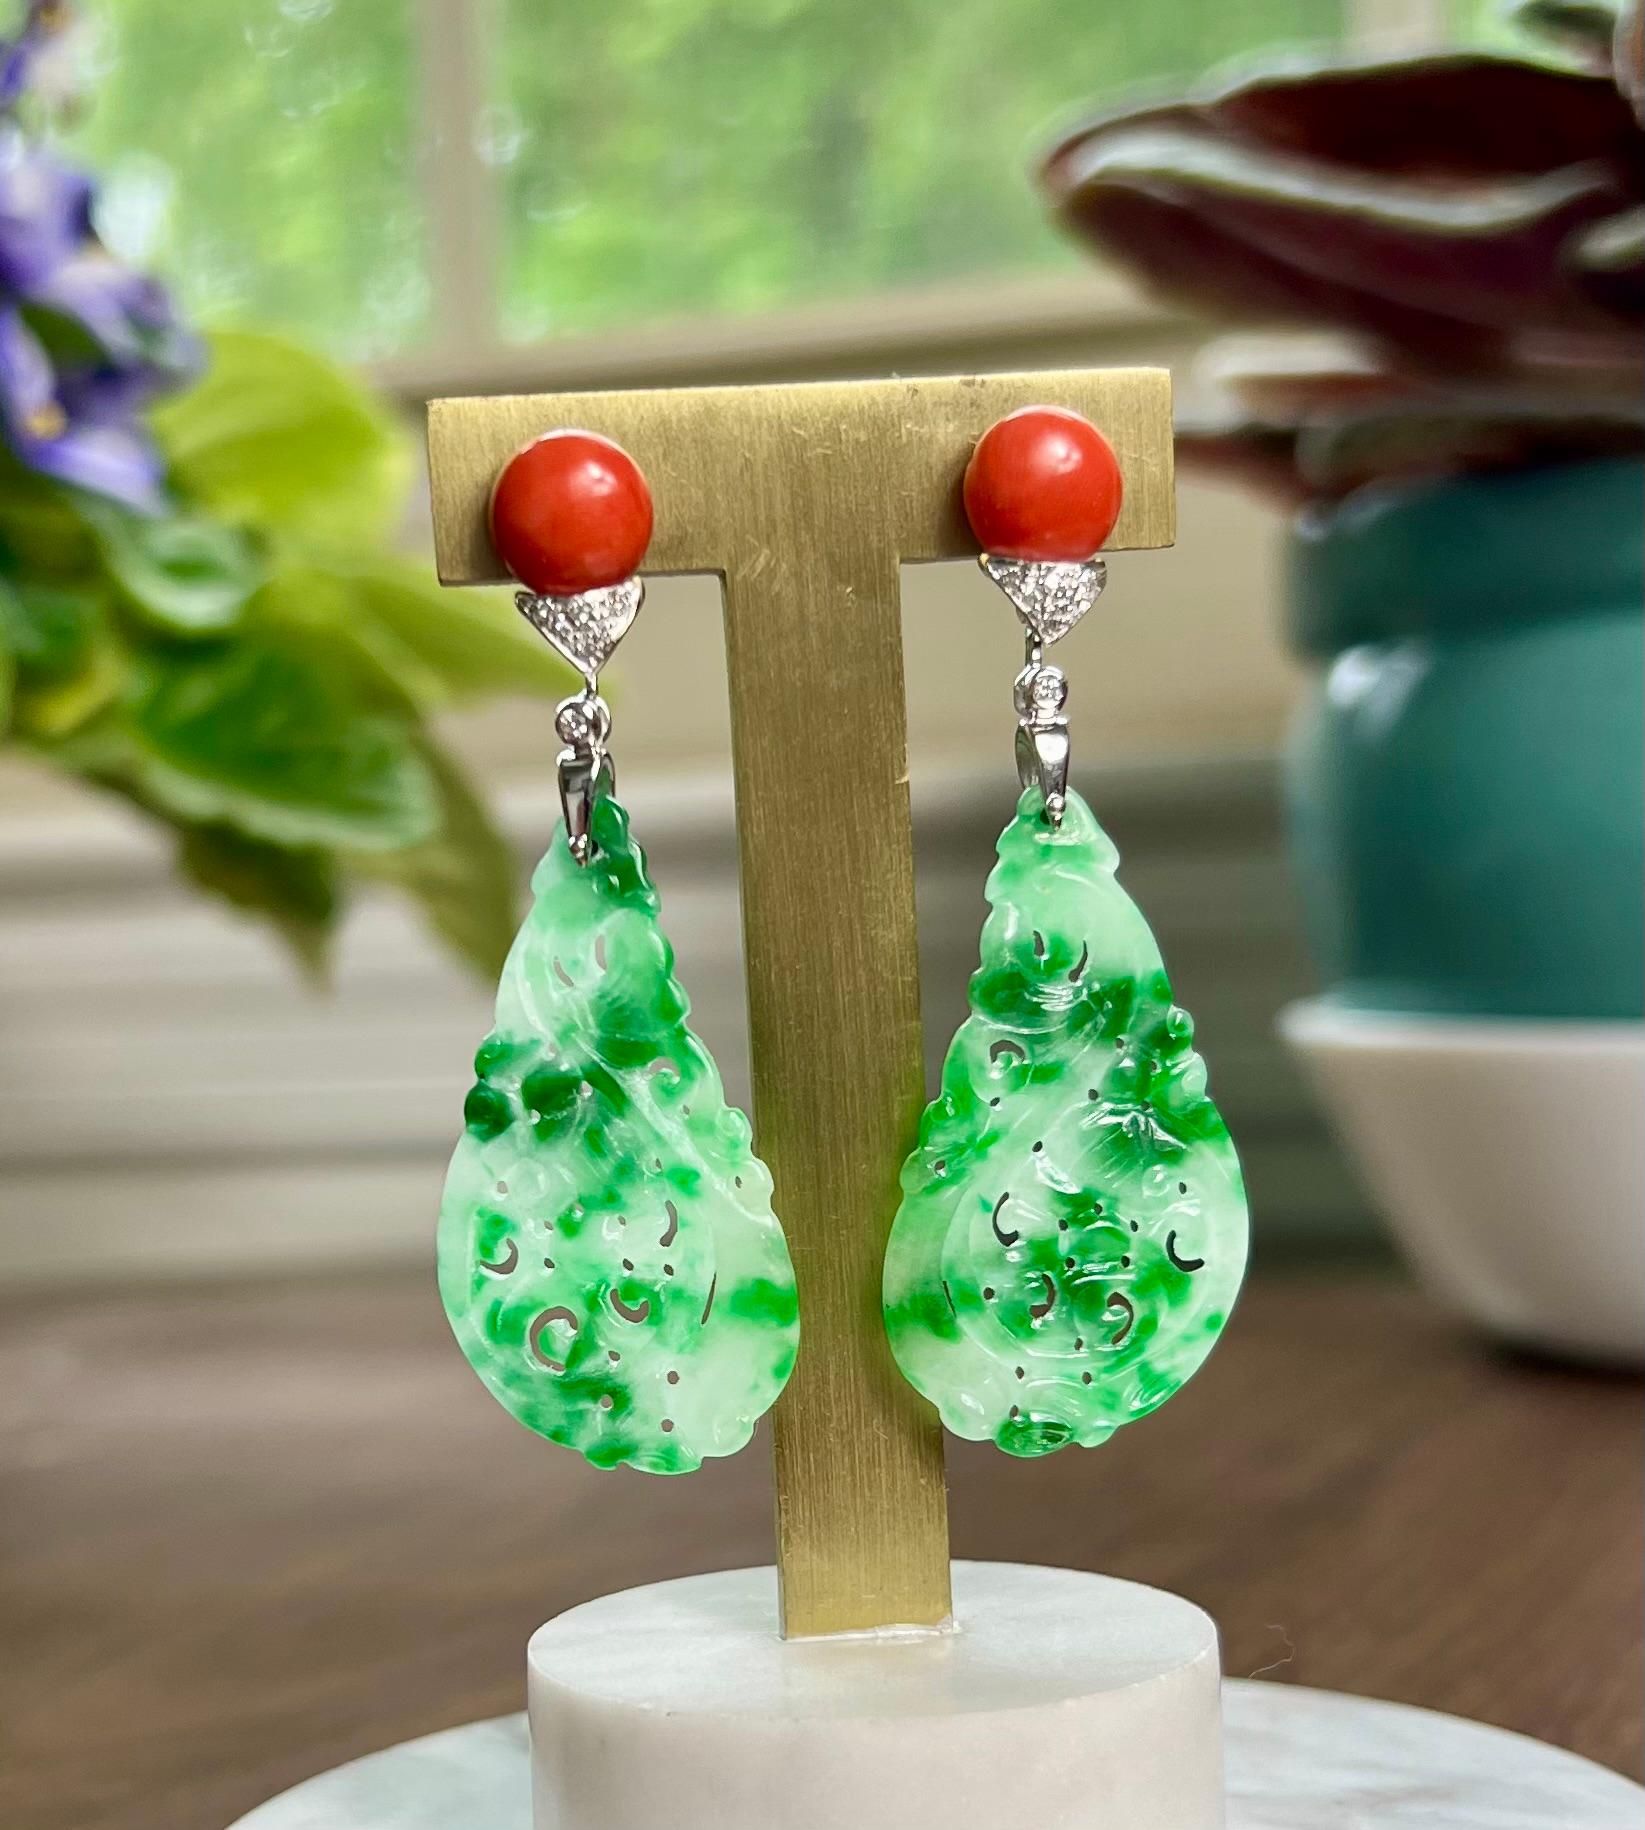 One pair of 18 karat white gold earrings each featuring one 9mm round cabochon coral stone, one carved color enhanced jadeite measuring 38.3mm x 20.6mm and four round brilliant cut diamonds, approximately 0.13-carat total weight with matching H